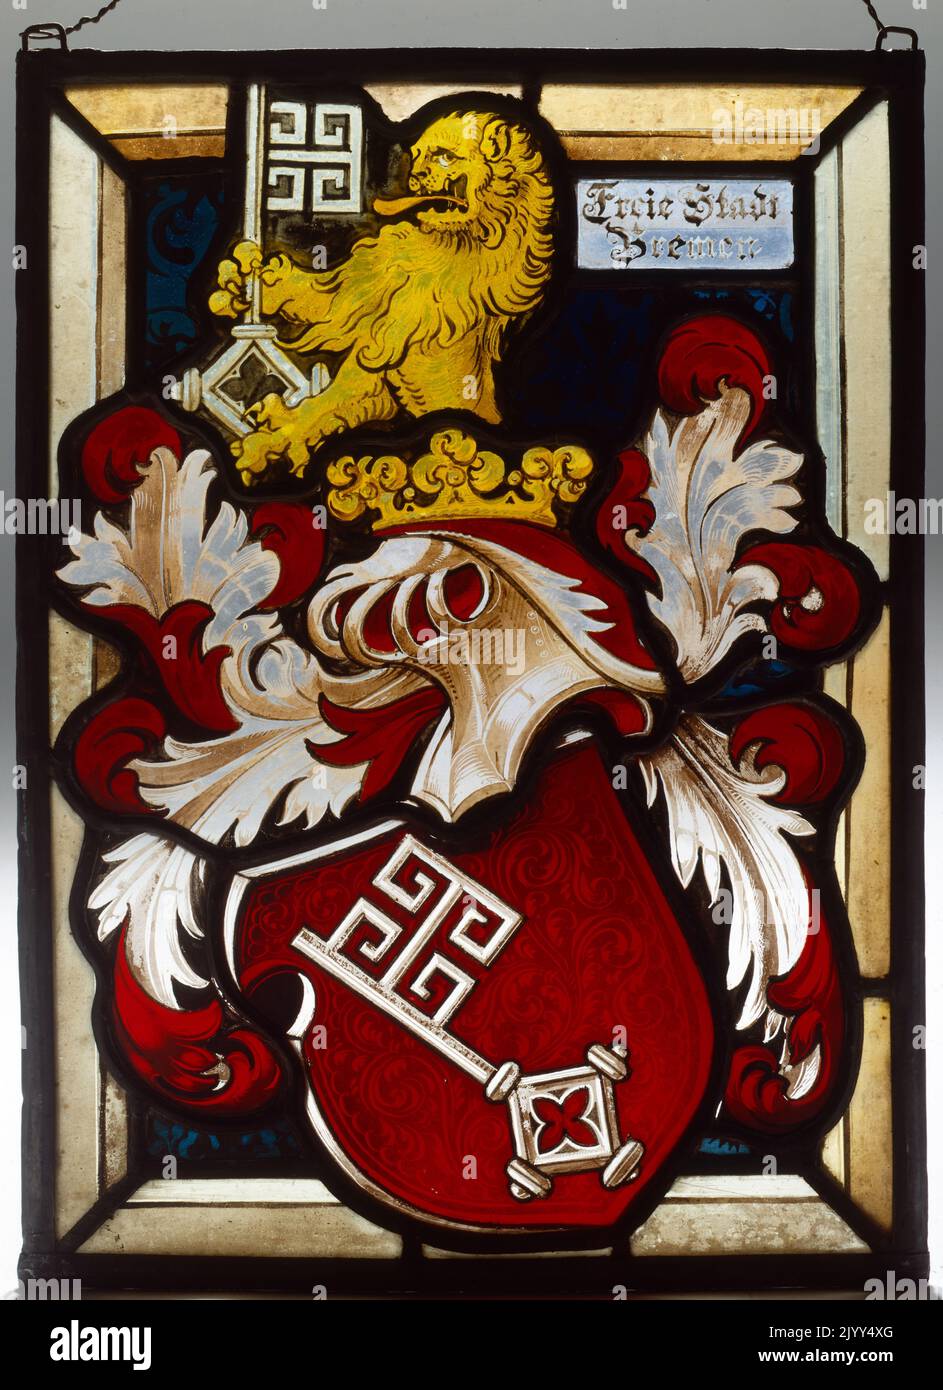 Stained glass window , 16th century celebrating the medieval Free City State of Bremen, (Germany), recognised as a political entity with its own laws. Stock Photo